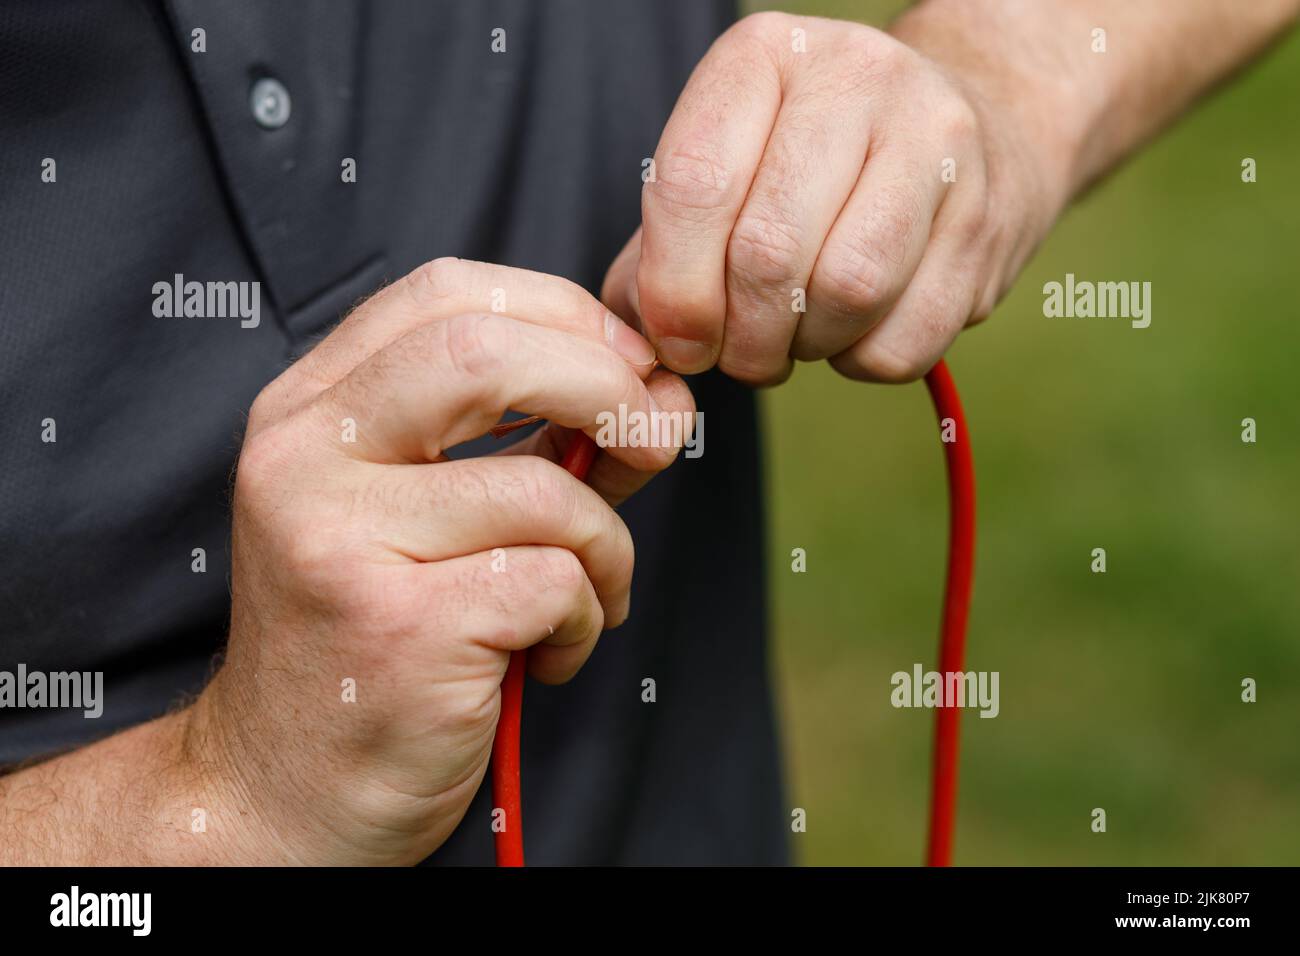 Hands connecting electrical wires together. Male hands and fingers holding a severed red wire Stock Photo